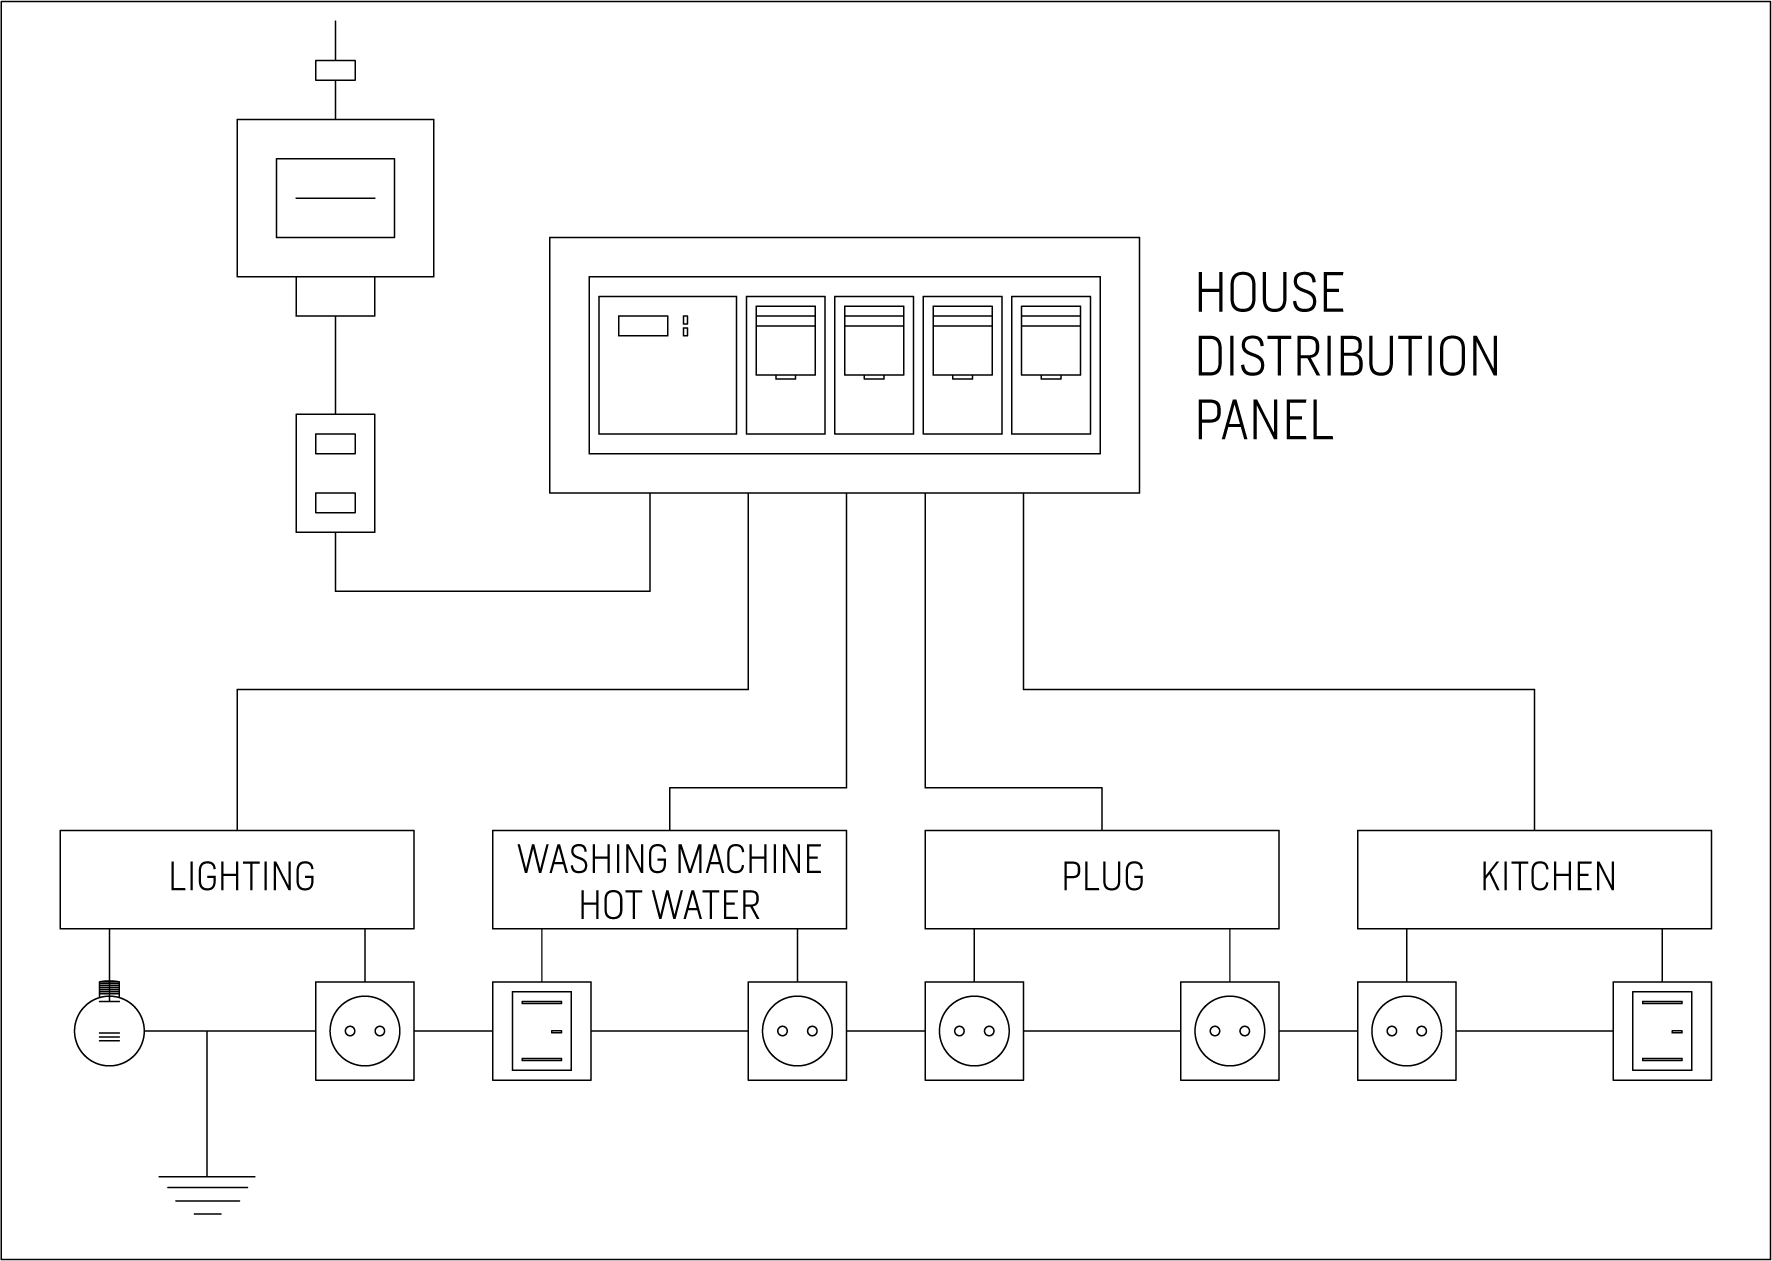 SINGLE-LINE DIAGRAM HOW TO REPRESENT THE ELECTRICAL INSTALLATION OF A HOUSE  - STACBOND  Light Control Panel Wiring Diagram    STACBOND